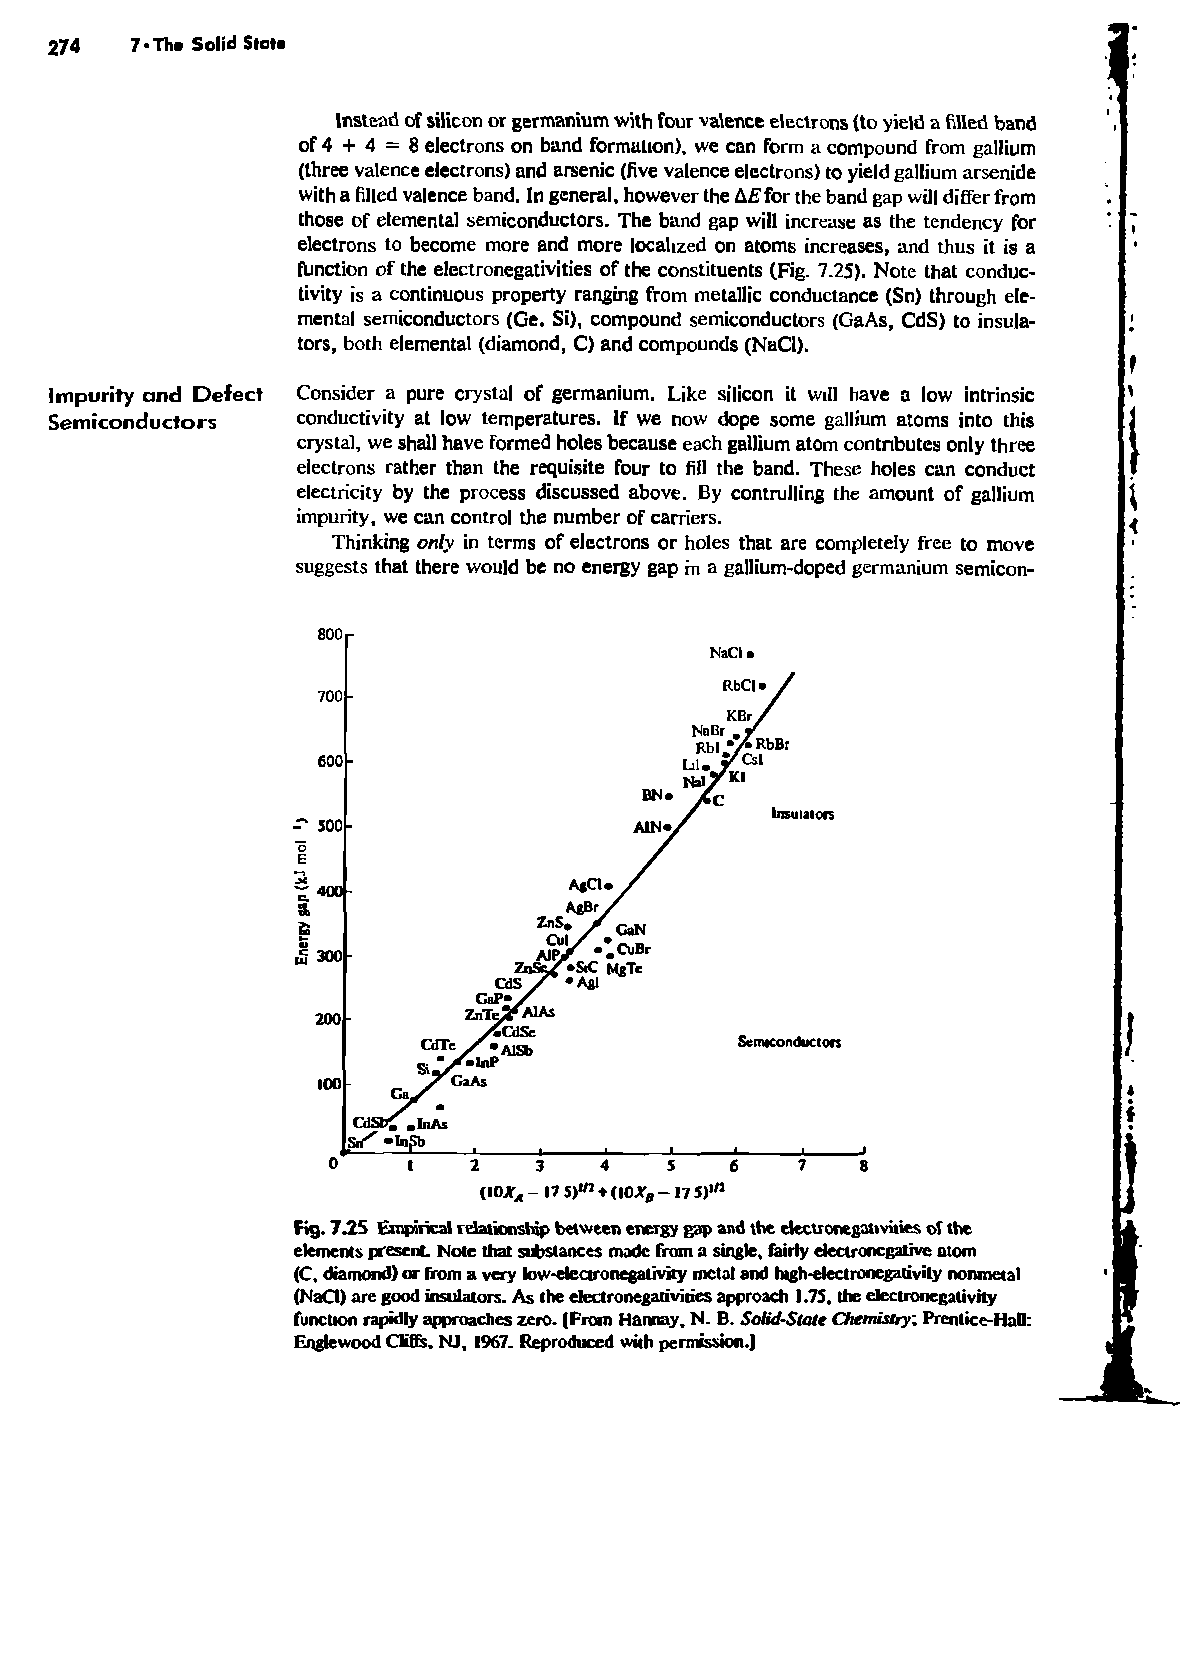 Fig. 7.25 Empirical relationship between energy gap and the electronegativities of the elements present. Note that substances made from a single, fairly electronegative atom (C, diamond) or from a very low-electronegativity metal and high-electronegativily nonmetal (NaCl) are good insulators. As the electronegativities approach 1.75, the electronegativity function rapidly approaches zero. (From Hannay, N. B. Solid-Slate Chemistry Prentice-Hall Englewood Cliffs. NJ, 1967. Reproduced with permission.)...